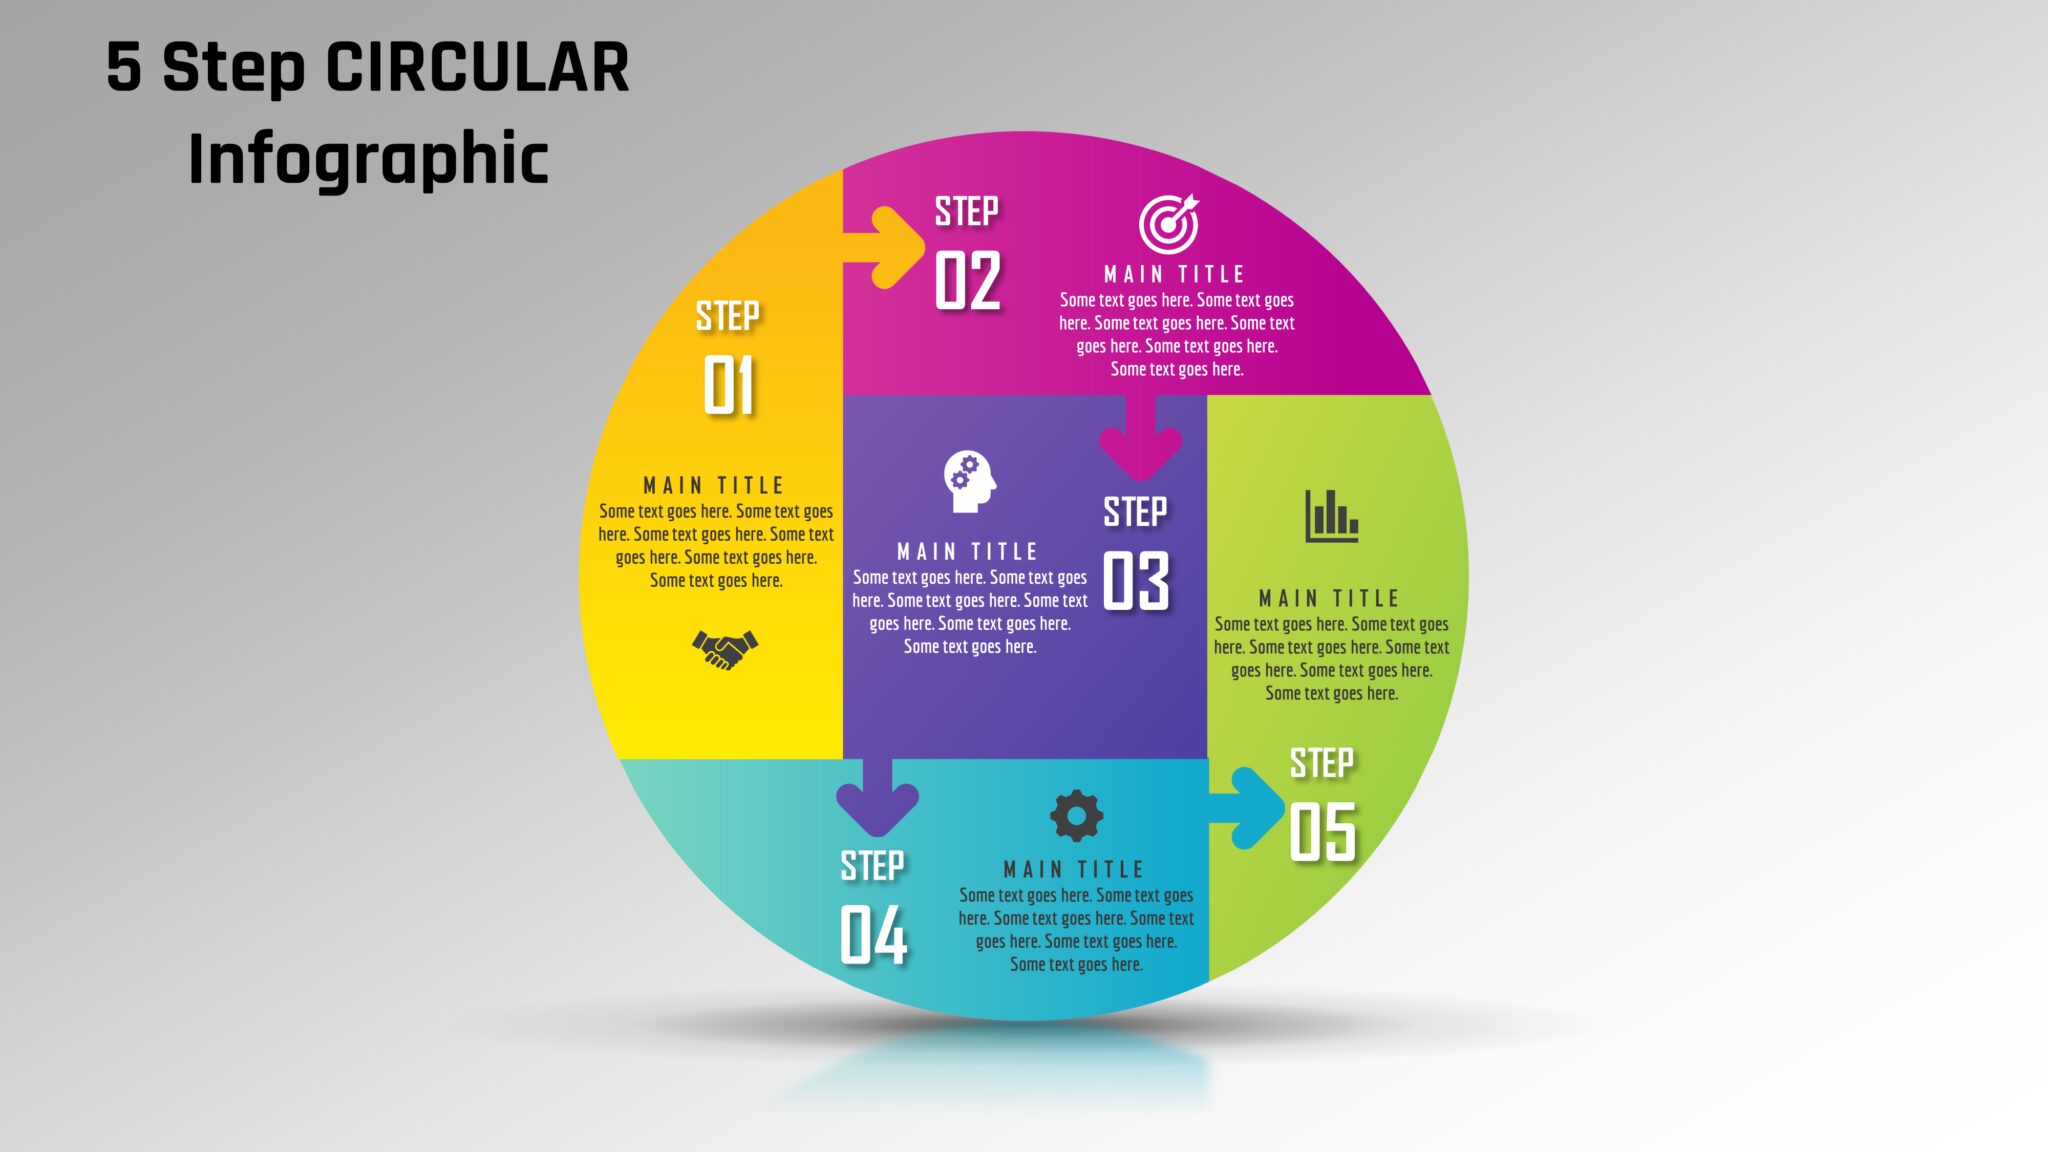 28powerpoint 5 Step Circular Infographic Powerup With Powerpoint 9458